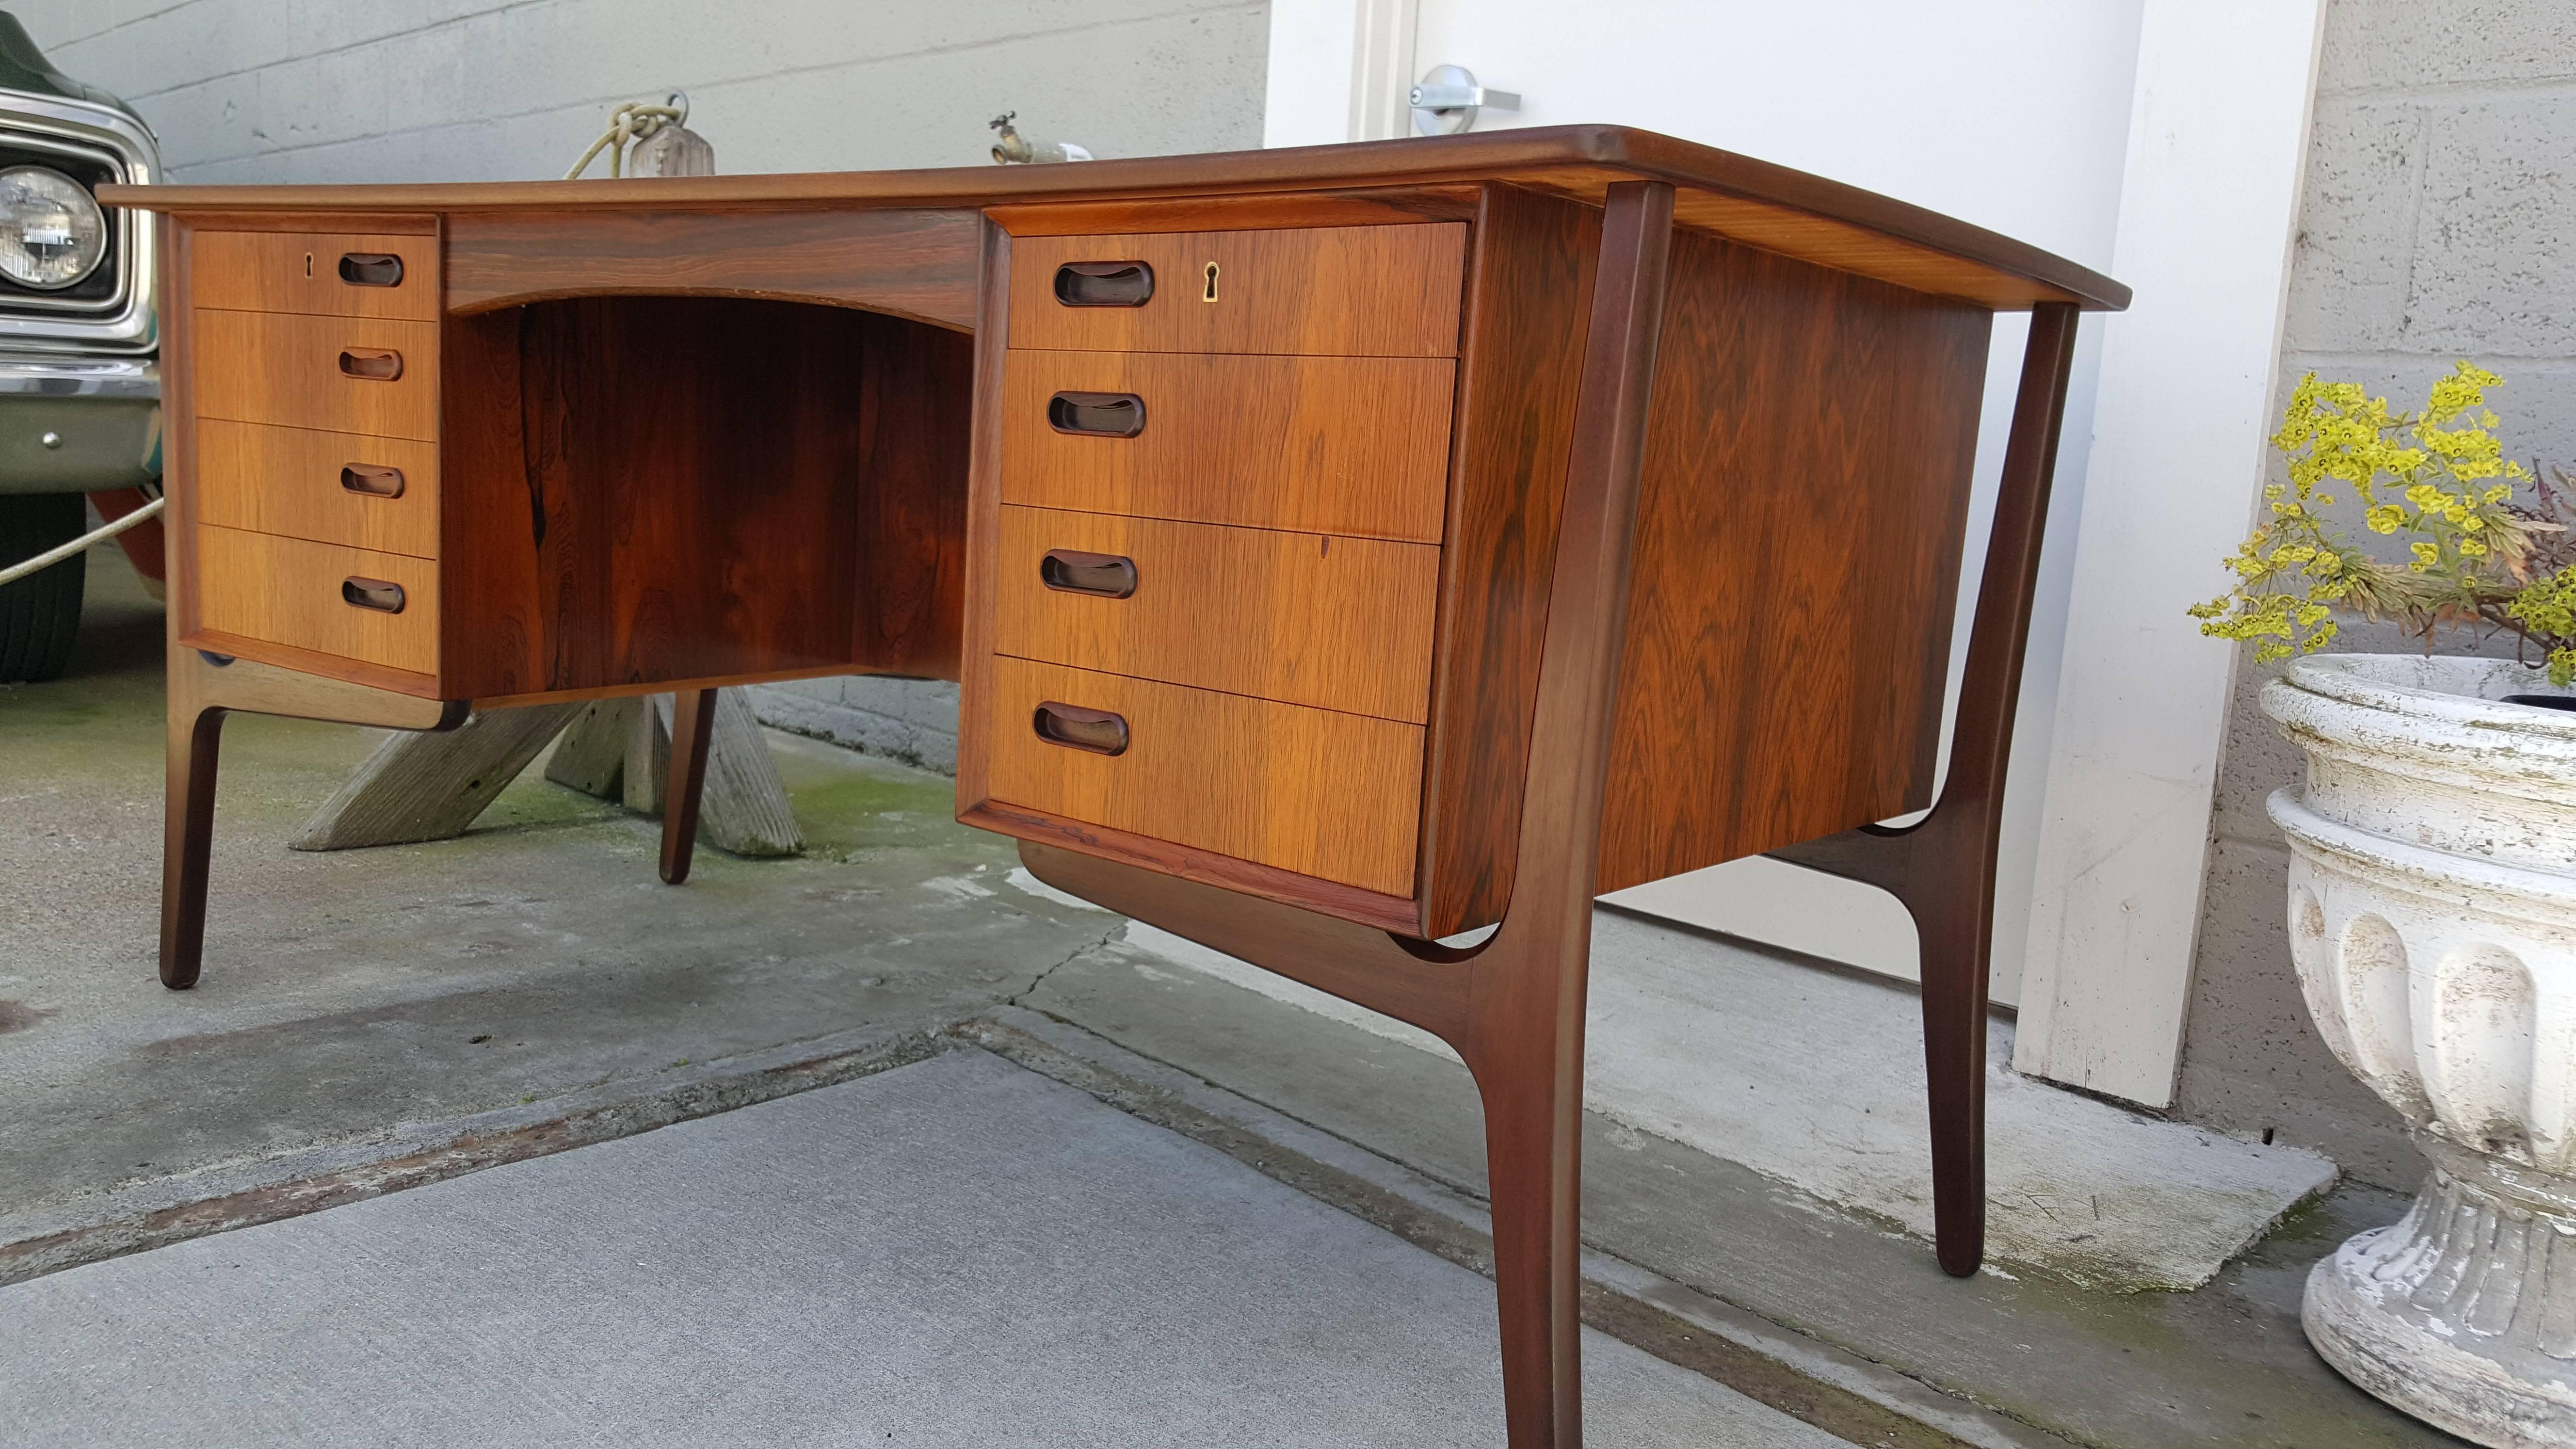 Danish Modern rosewood desk with a curved top floating on an exoskeleton frame. Eight drawers with a finished back featuring a locking cabinet door and a bookshelf. Key included. Nice original finish in very good vintage condition.